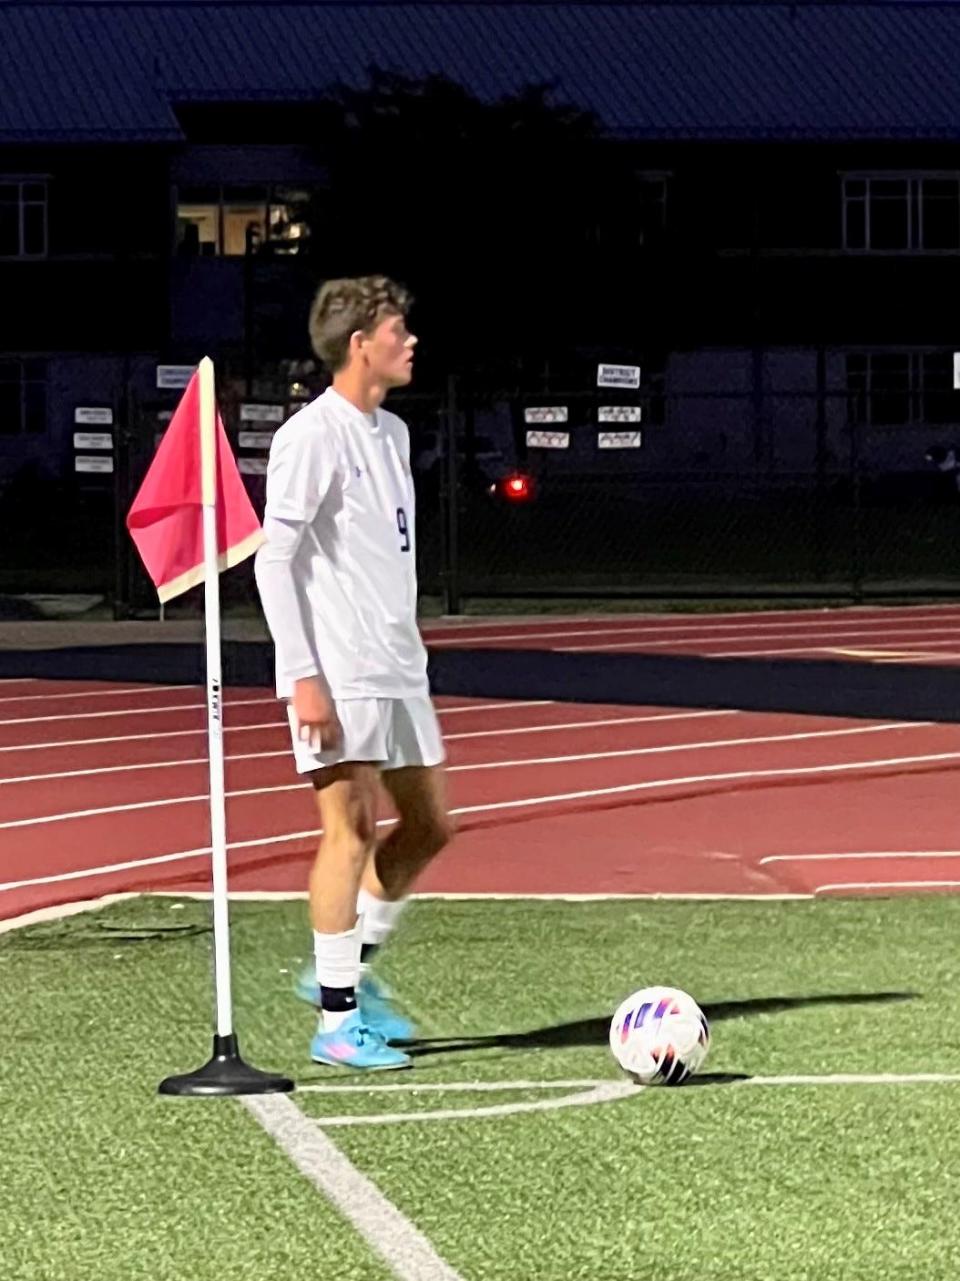 River Valley senior Gabe Douce gets set for a corner kick during a boys soccer match at Highland this season. Douce was named second-team All-Ohio in Division II and is the first player in program history to make all-state.